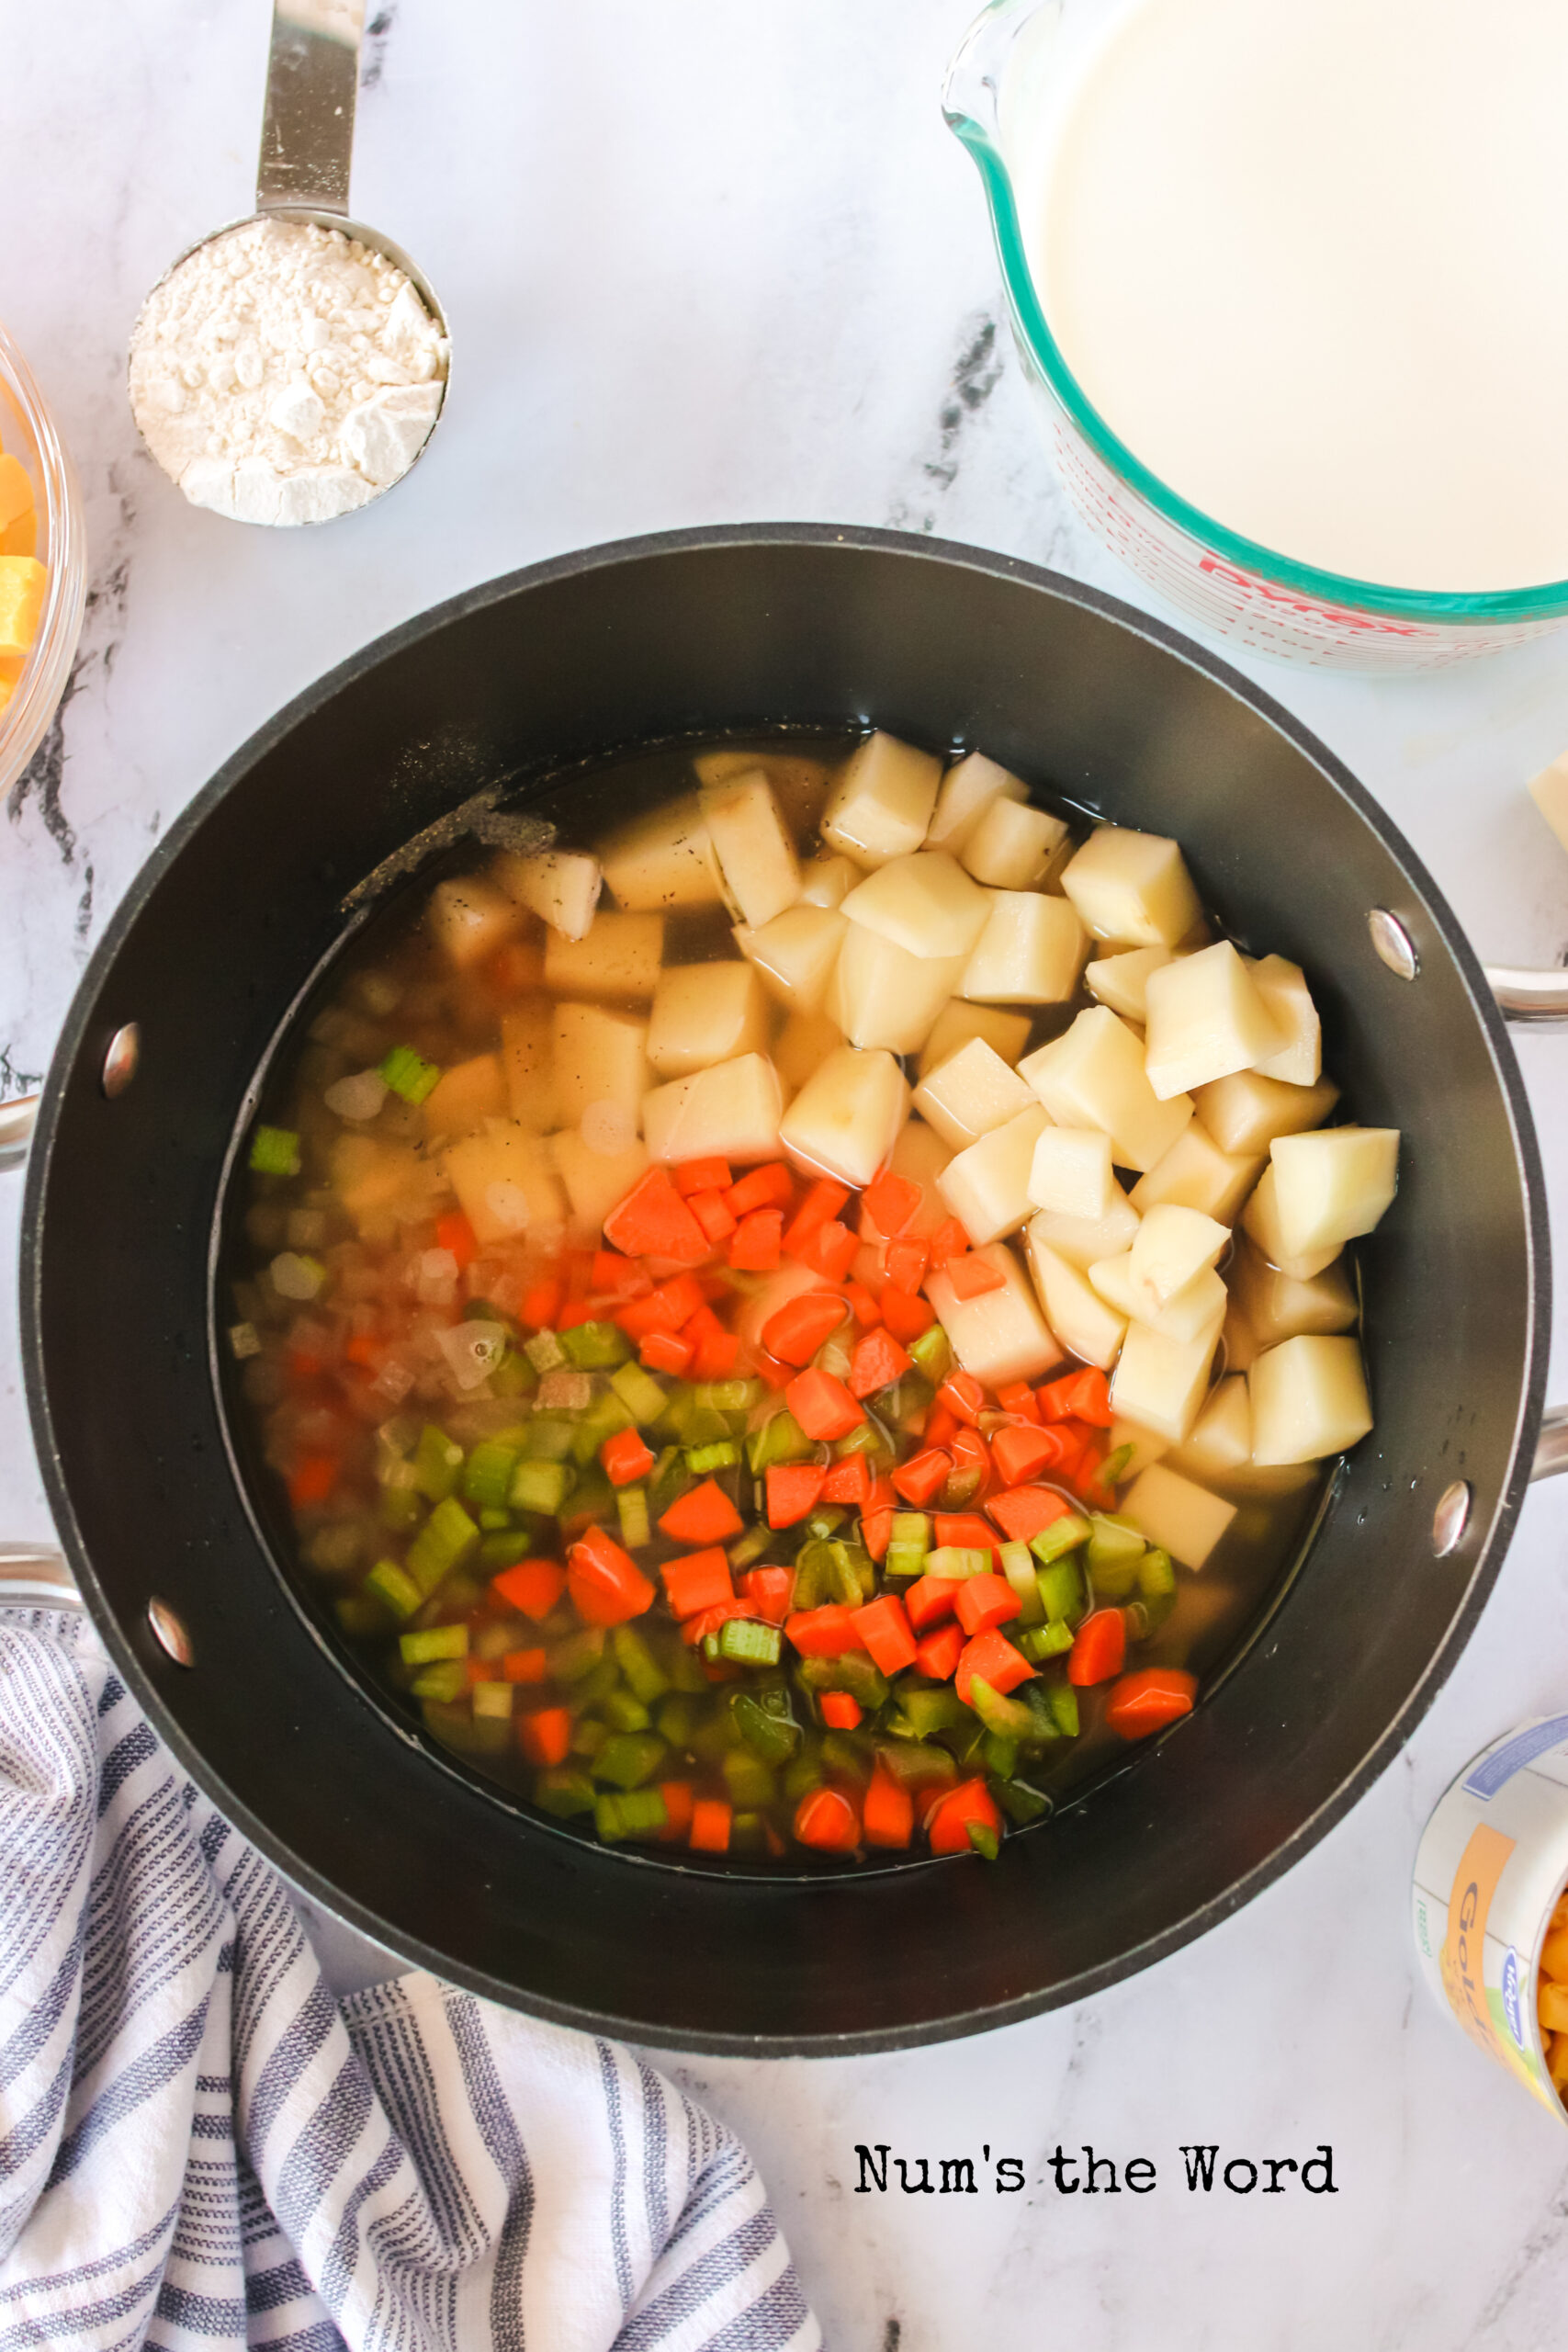 chicken broth, potatoes, carrots, celery, onion and black pepper added to a pot.